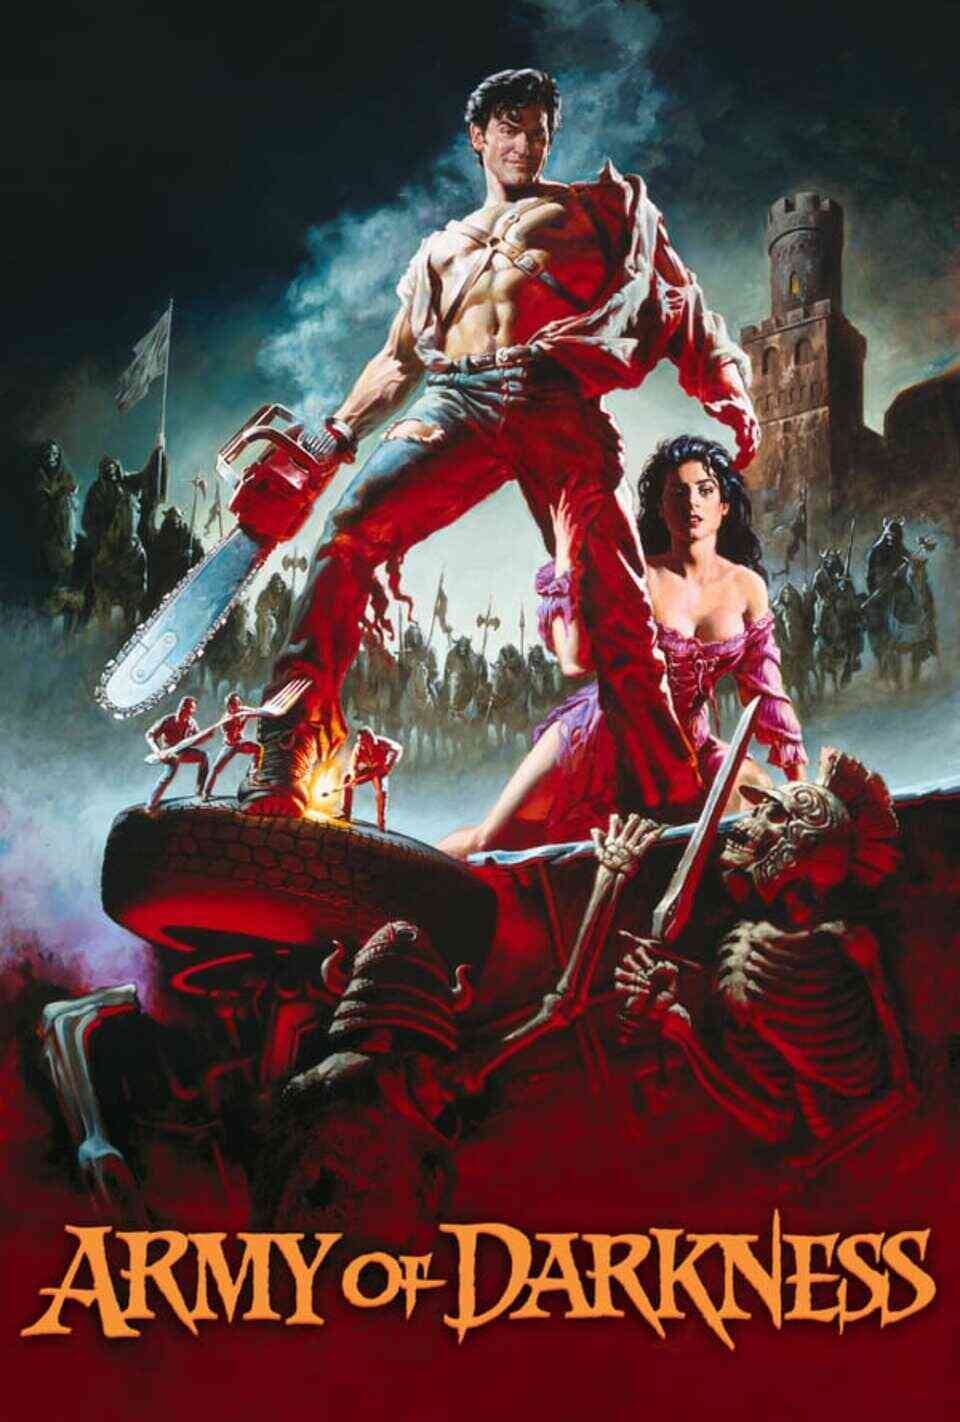 Read Army of Darkness screenplay (poster)